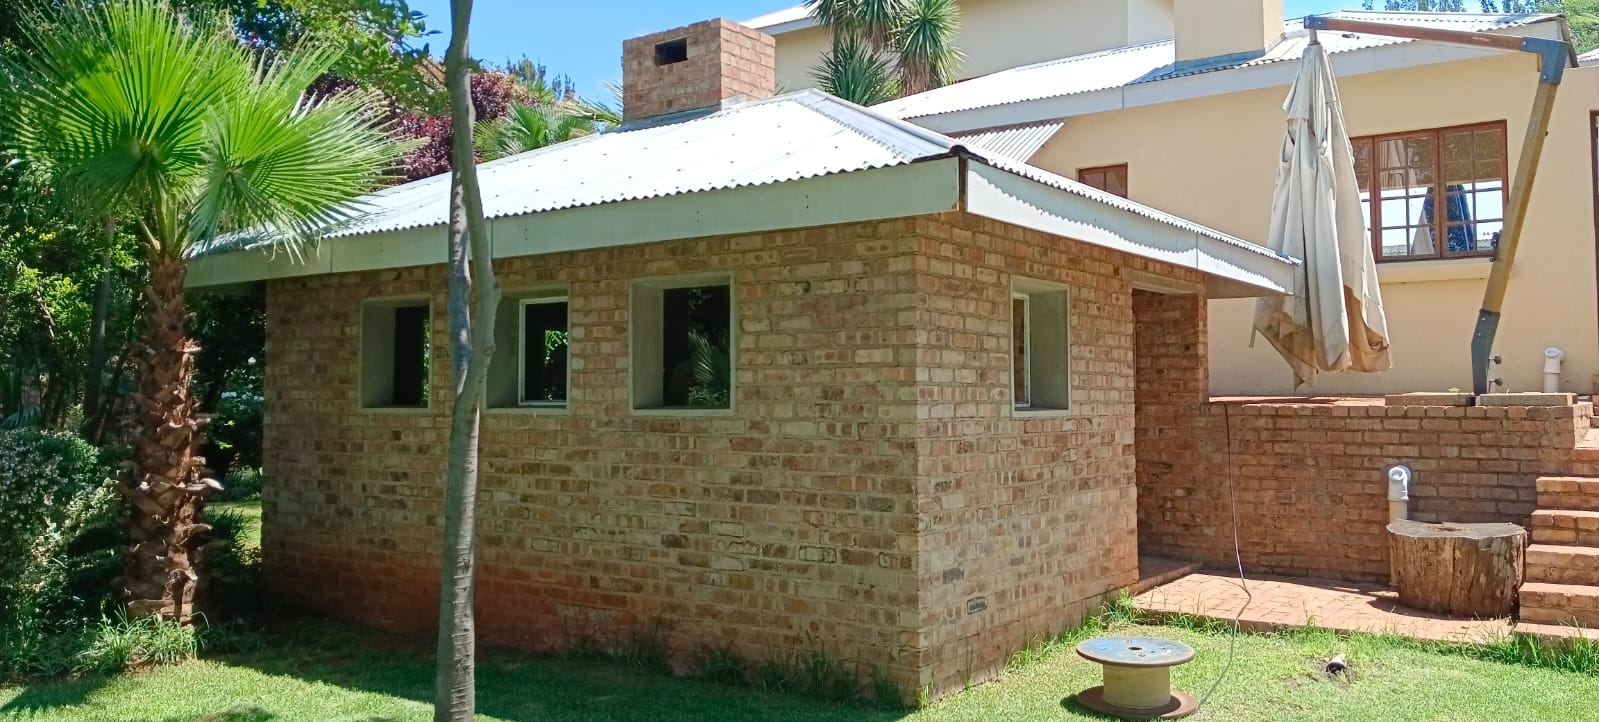 6 Bedroom Property for Sale in Bashewa A H Gauteng